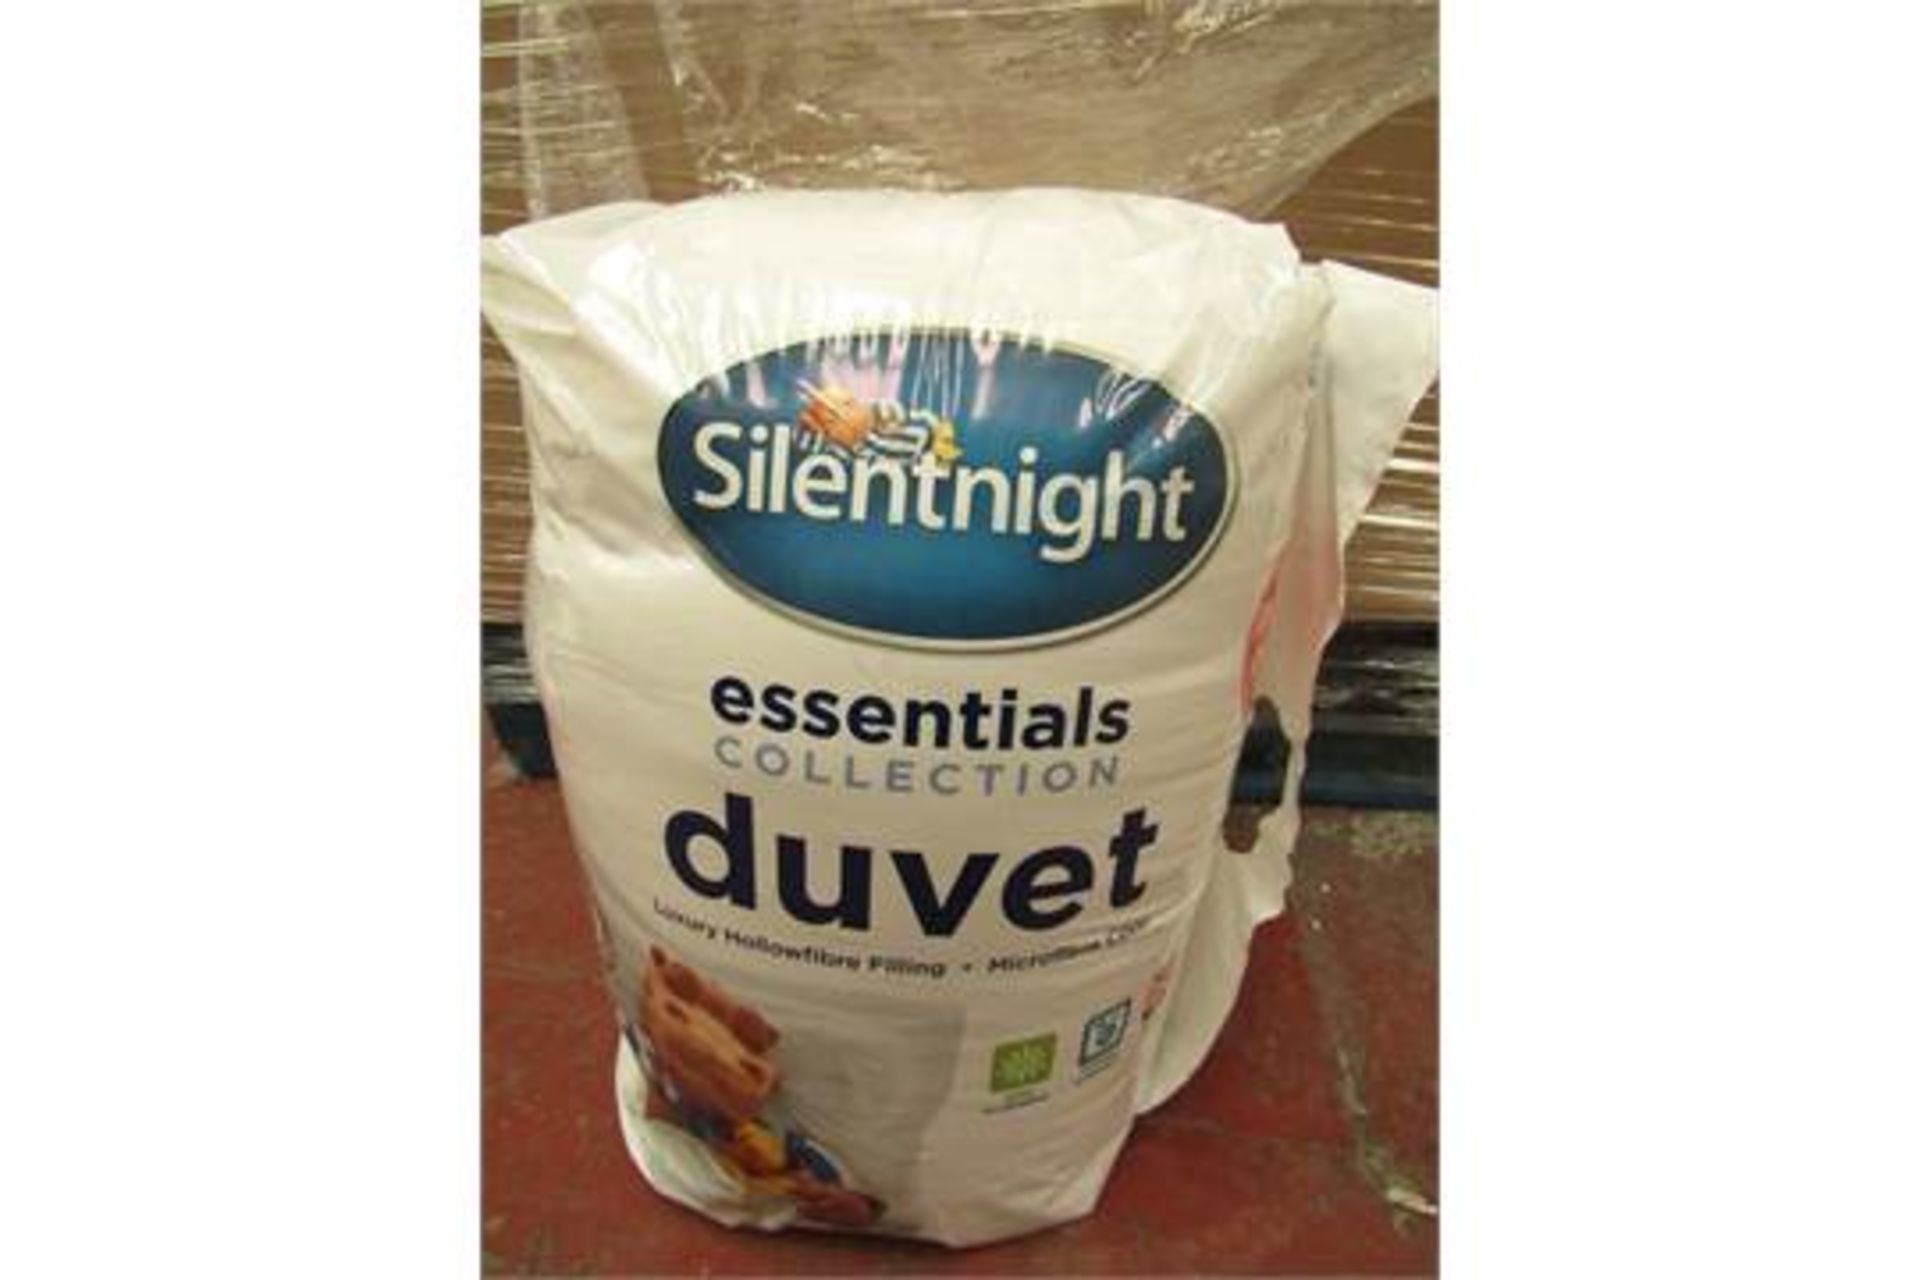 Pack of 4x Silentnight essentials duvet, 10.5 Tog king size, new in packaging.